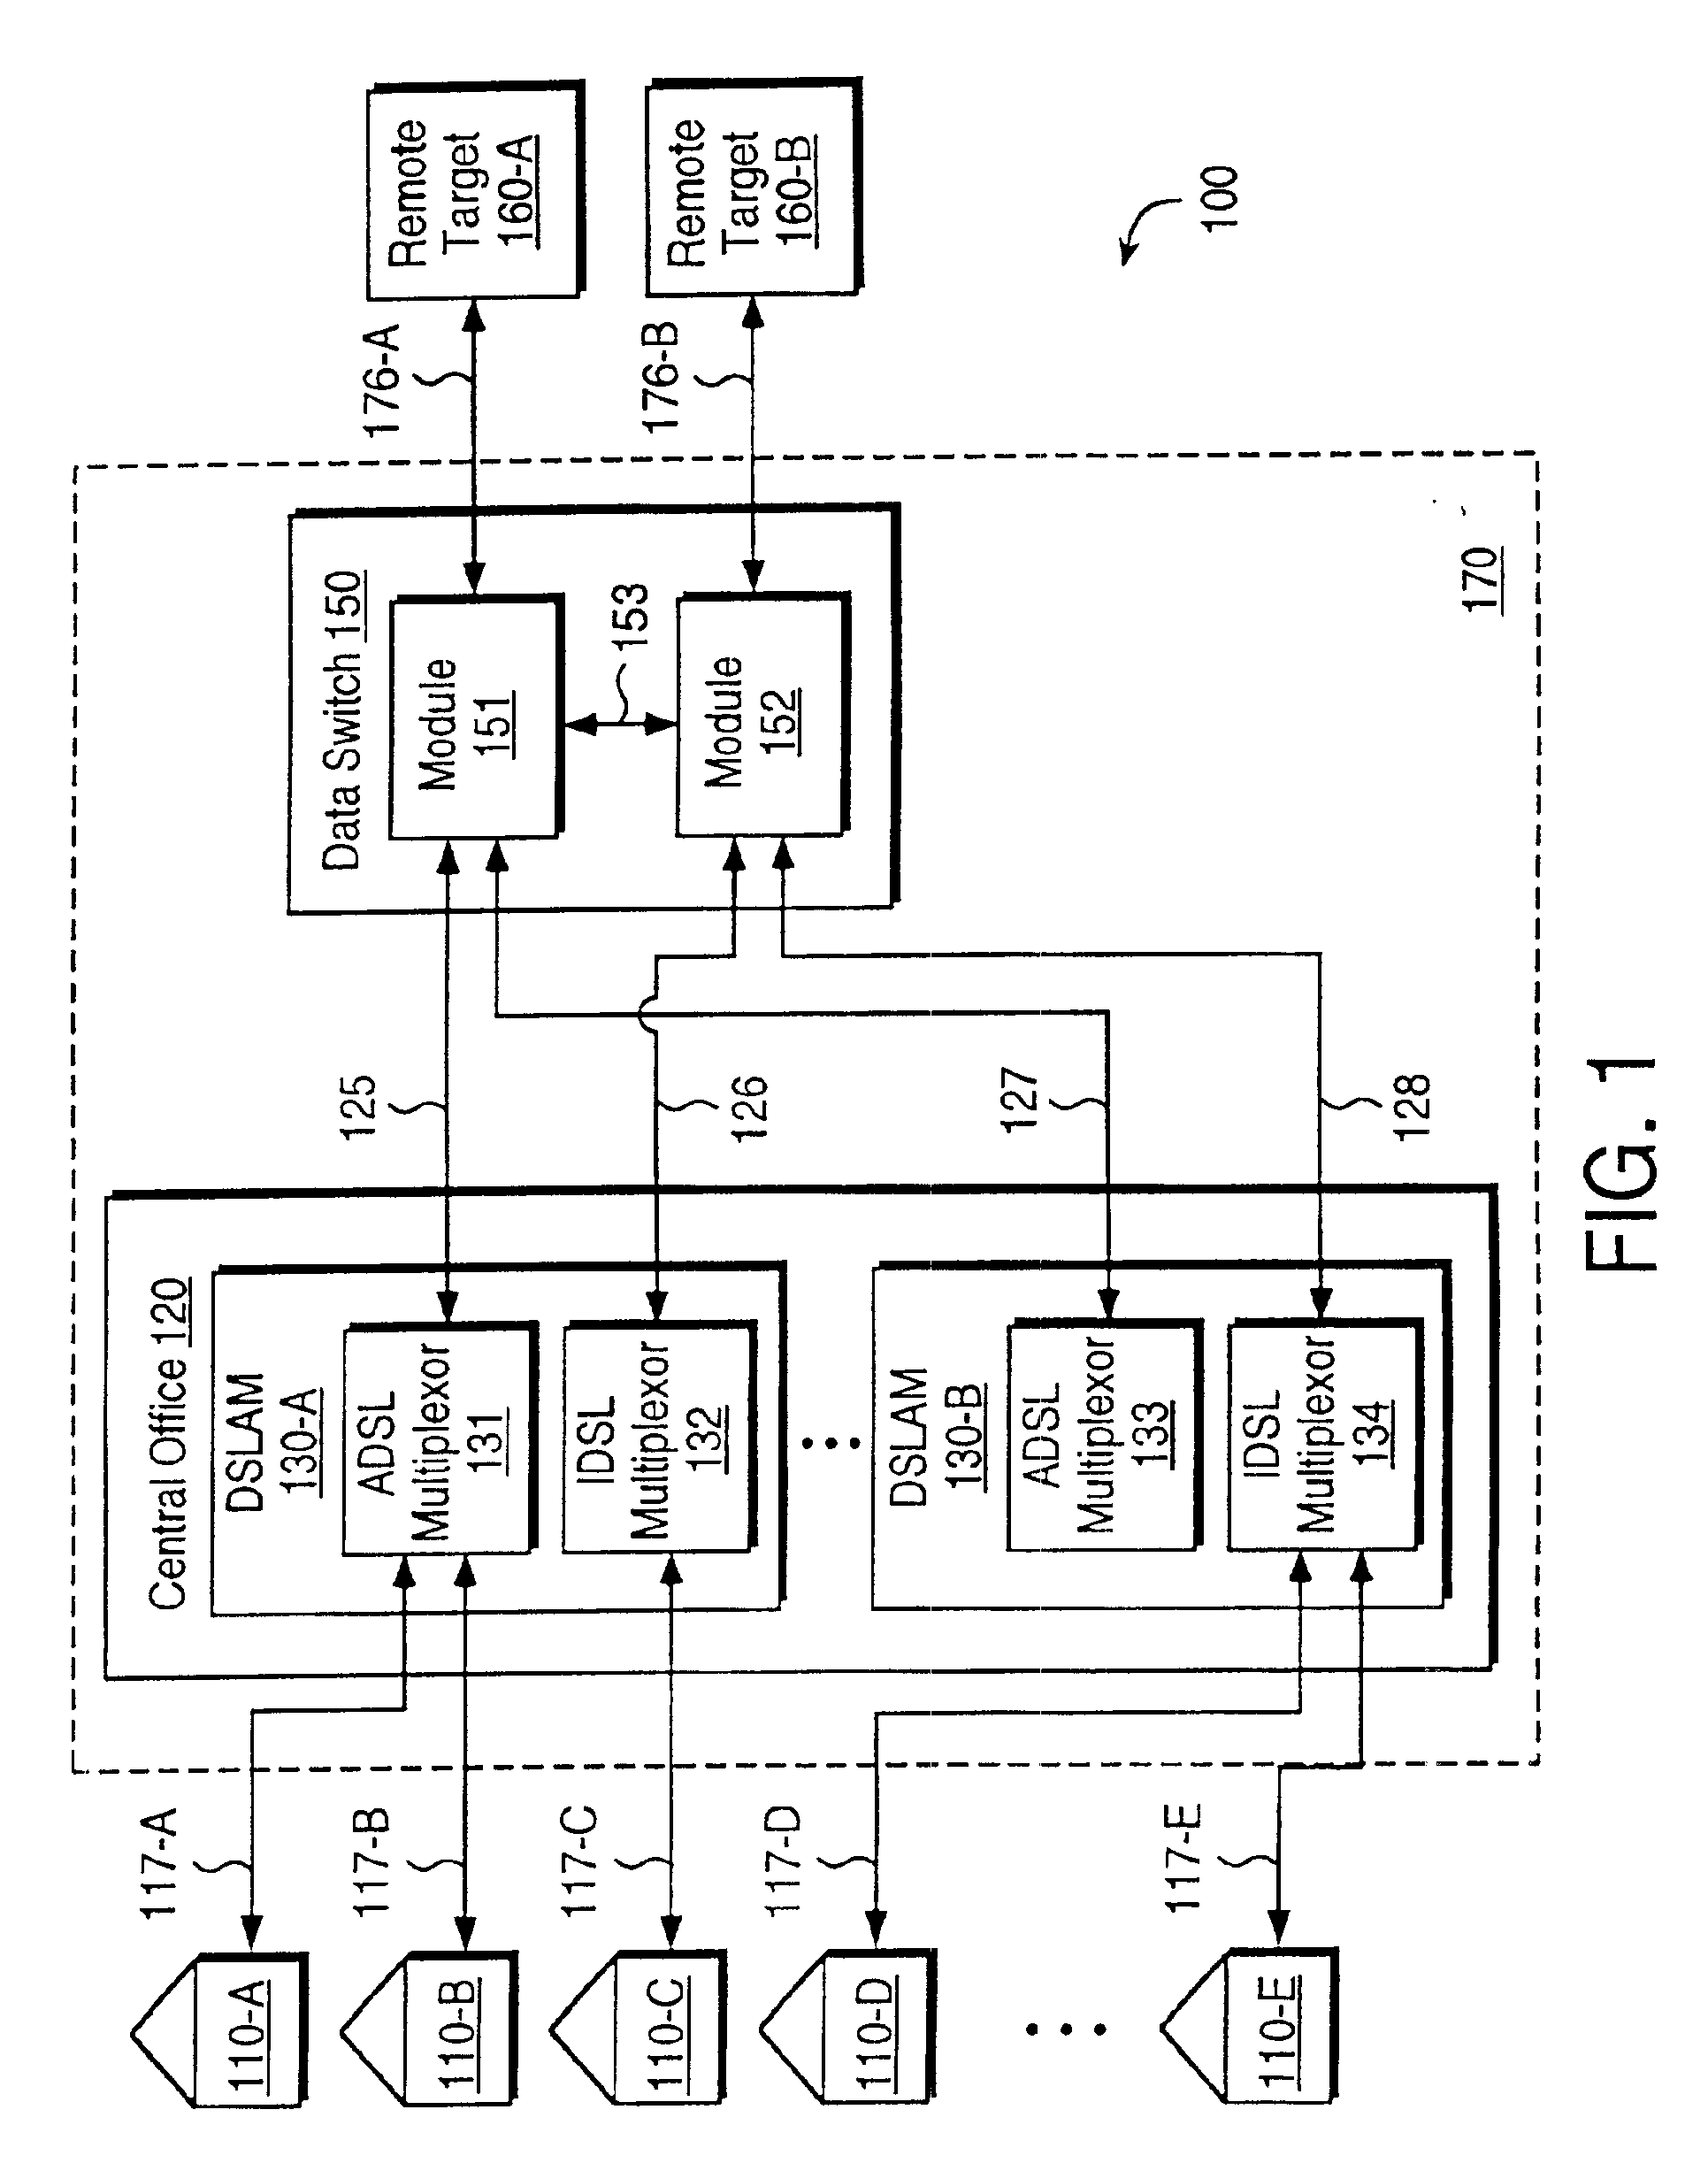 System method and network for providing high speed remote access from any location connected by a local loop to a central office